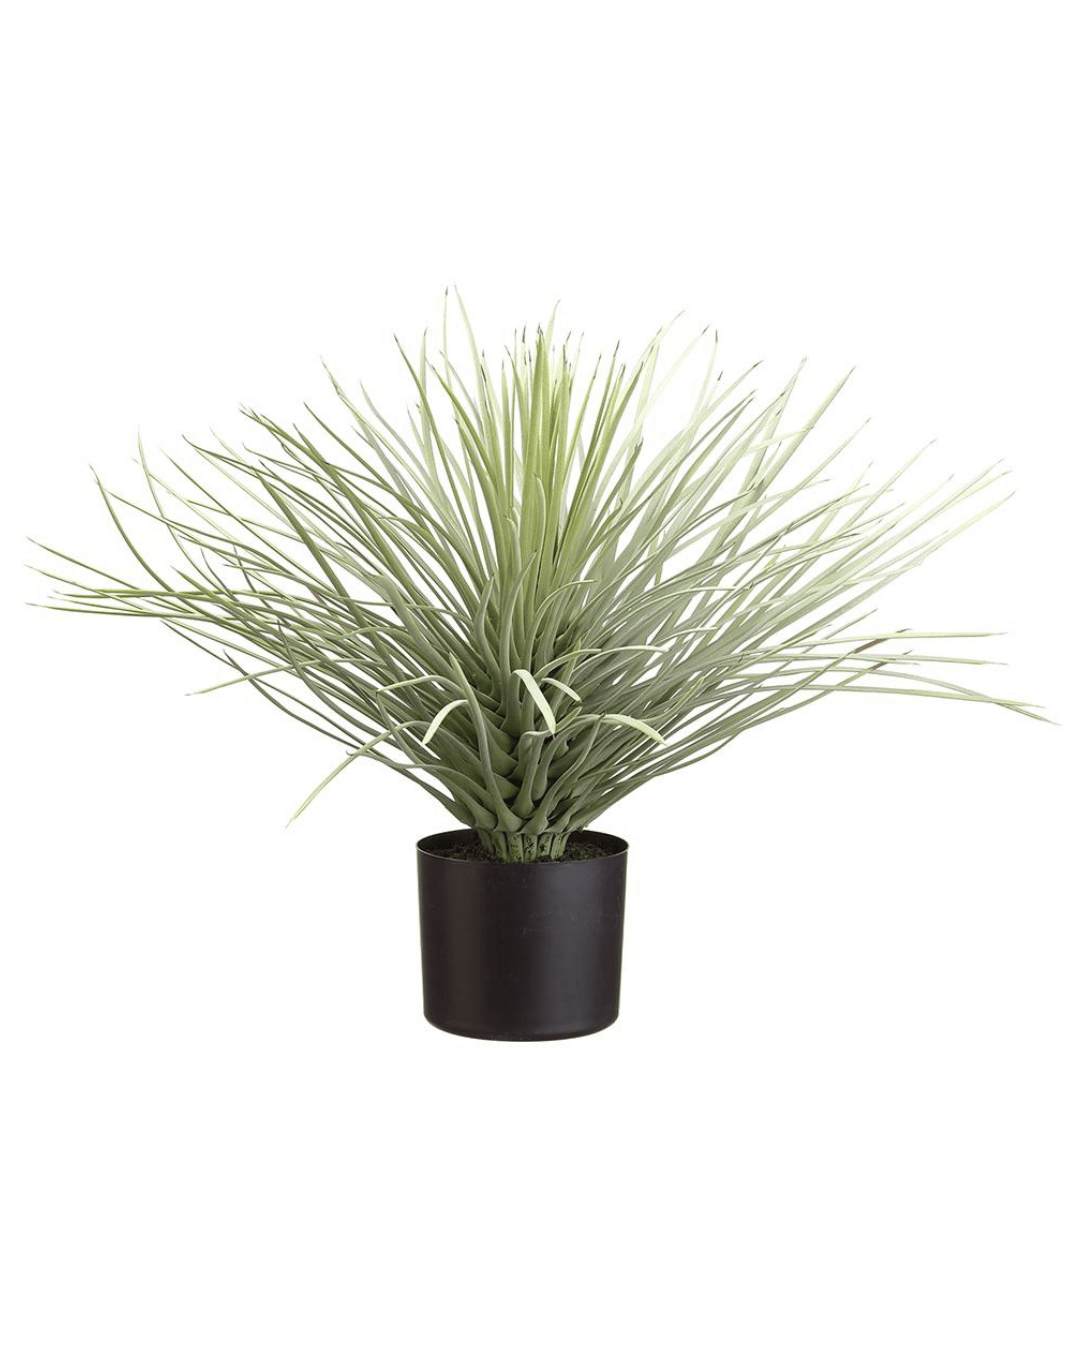 Artificial 19" Whipple Yucca plant with long, thin leaves in a simple black pot, set against a bungalow-style backdrop evocative of Scottsdale, Arizona by AllState Floral And Craft.